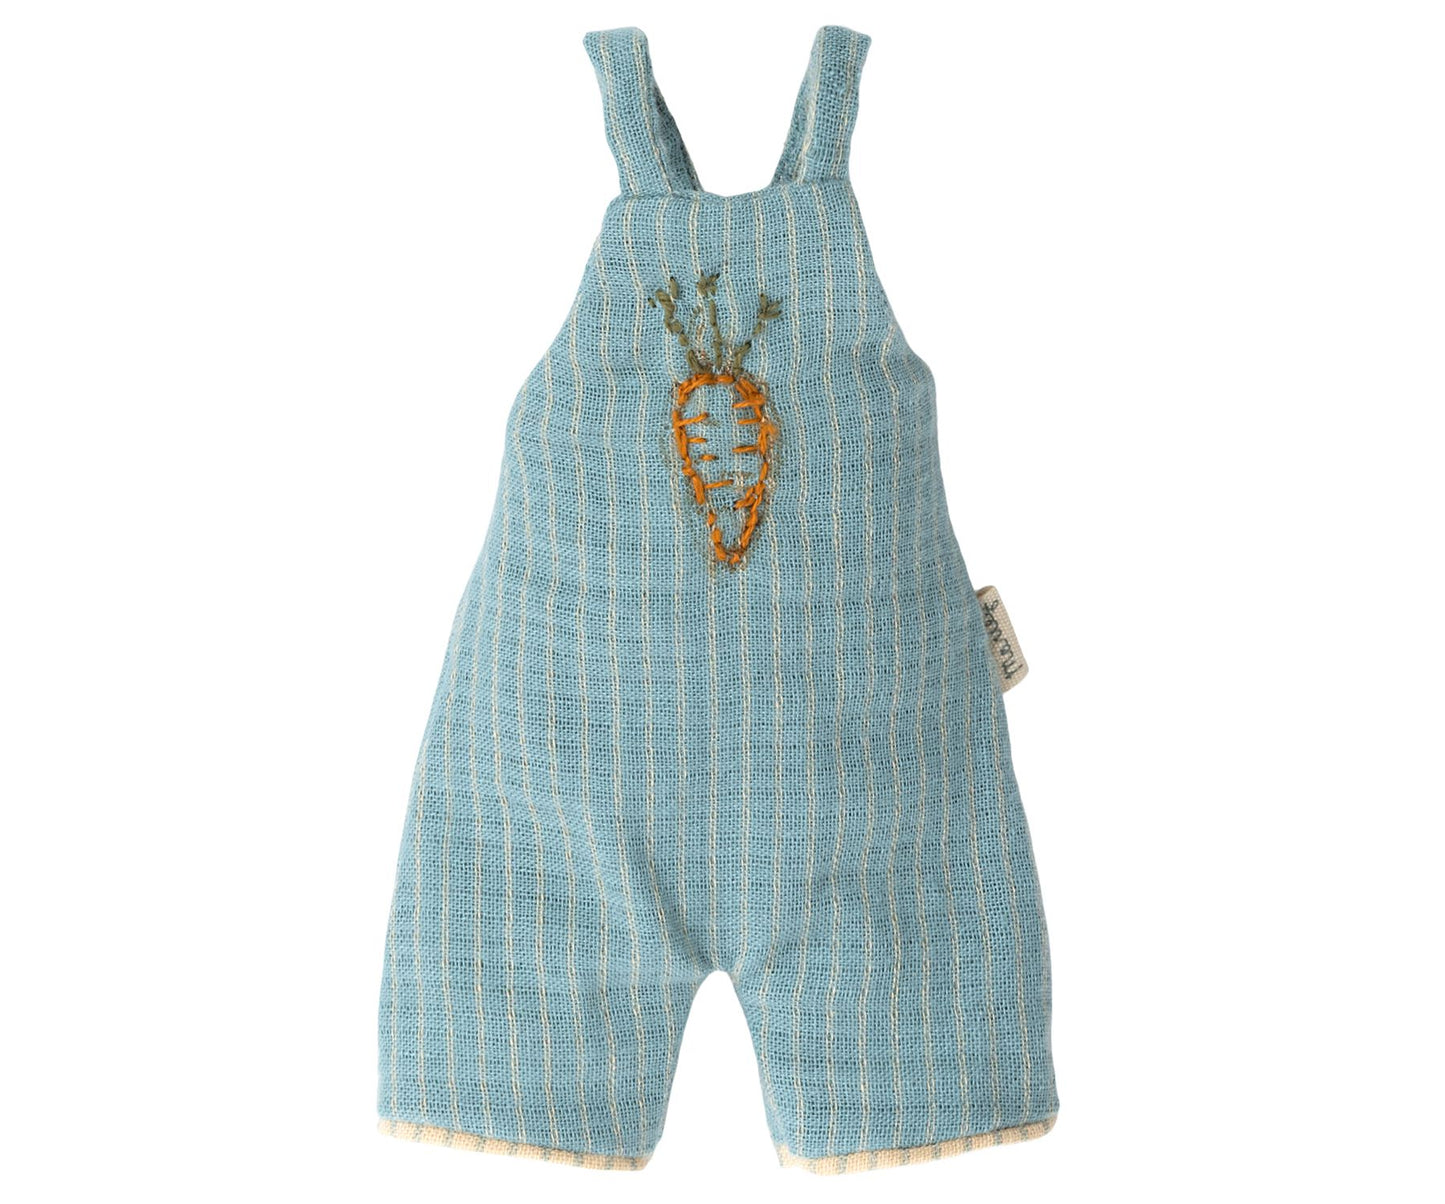 2022 Maileg Overalls with Embroidered Carrot-Size 2, Blue